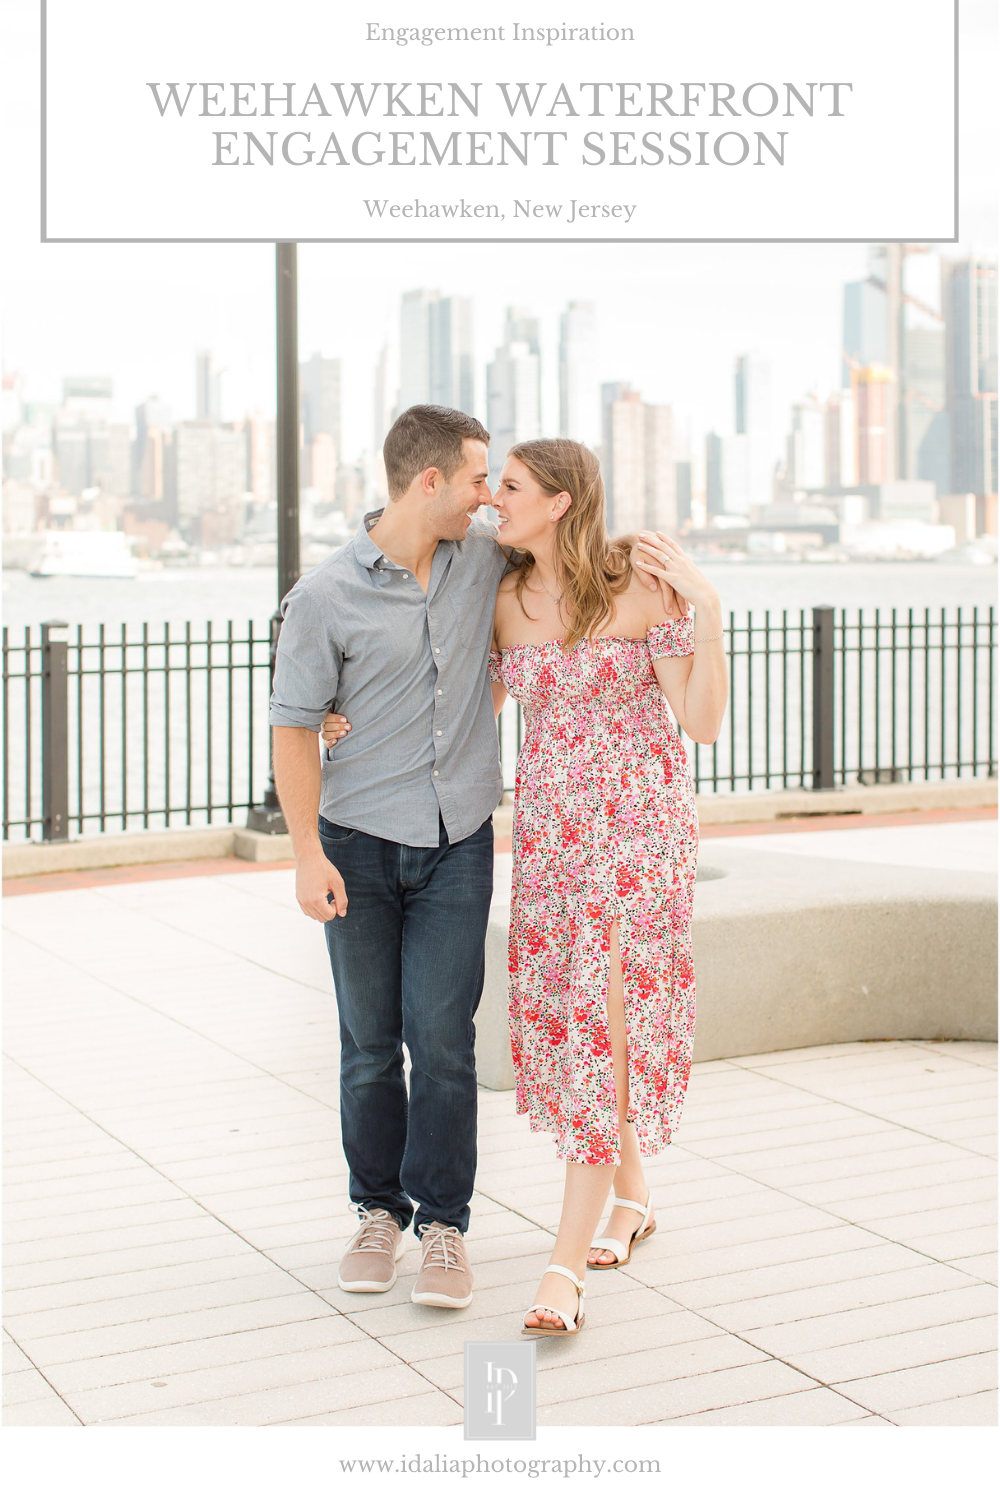 Weehawken Waterfront engagement session with bride and groom 